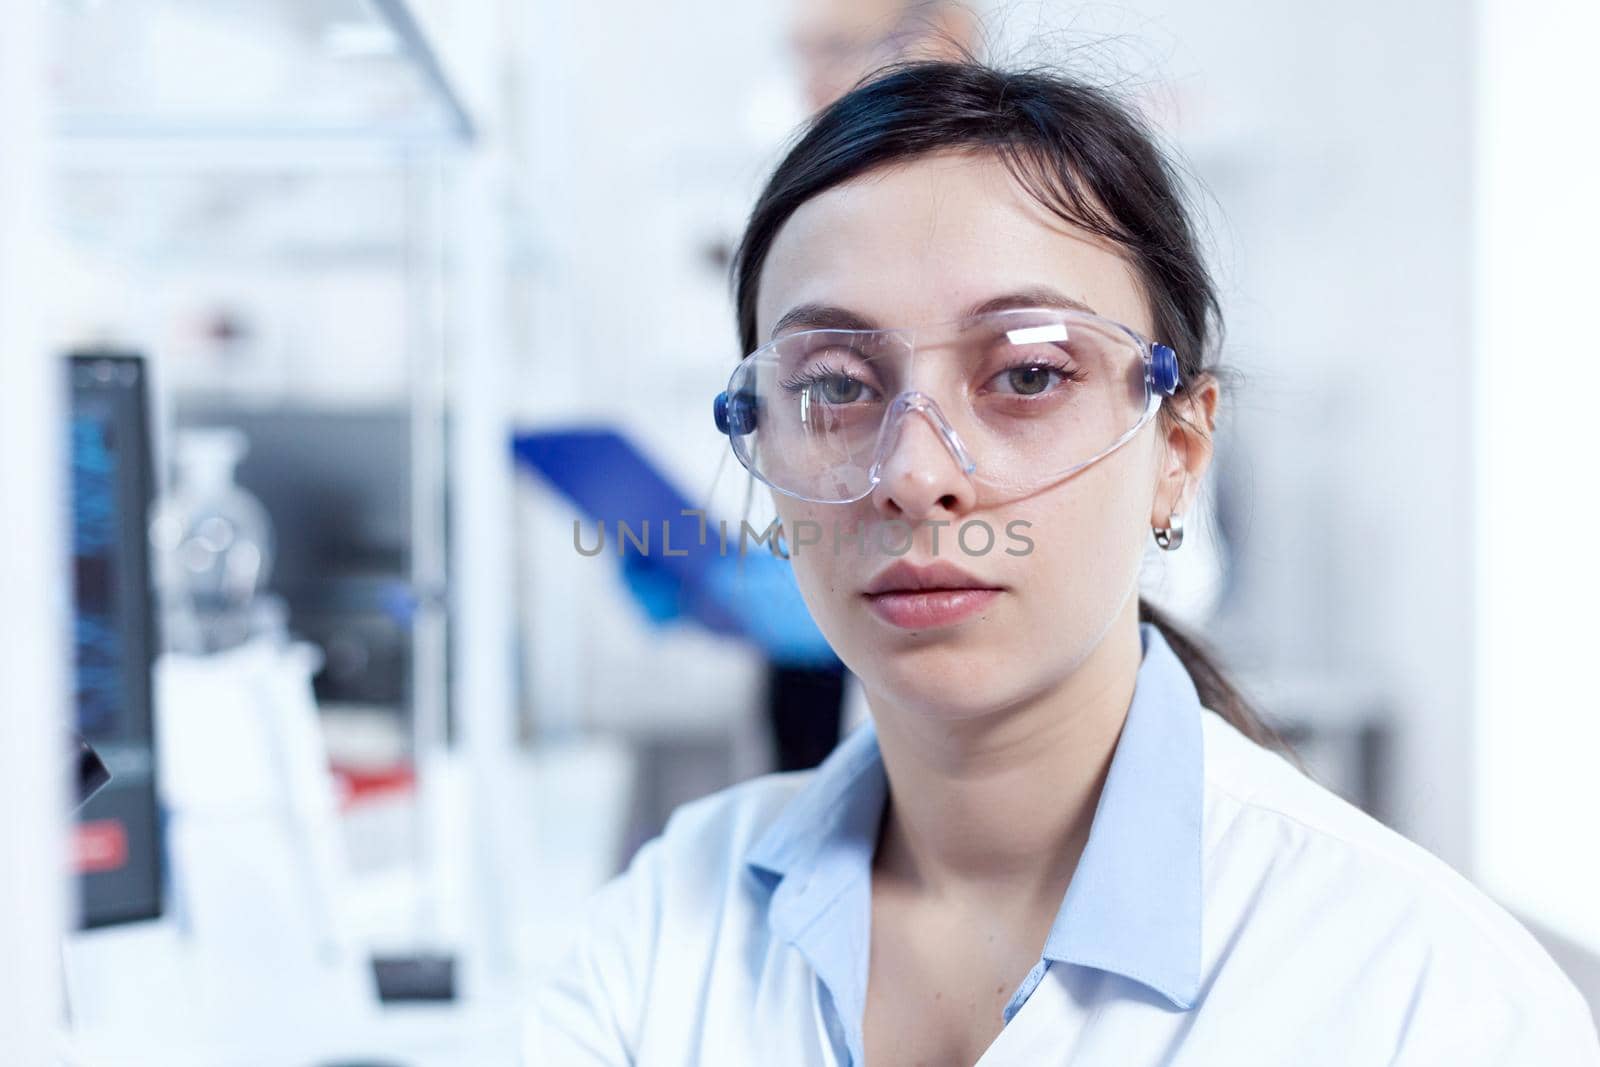 Close up portrait of virus researcher in scientific laboratory looking at camera. Chemist wearing lab coat using modern technology during scientific experiment in sterile environment.